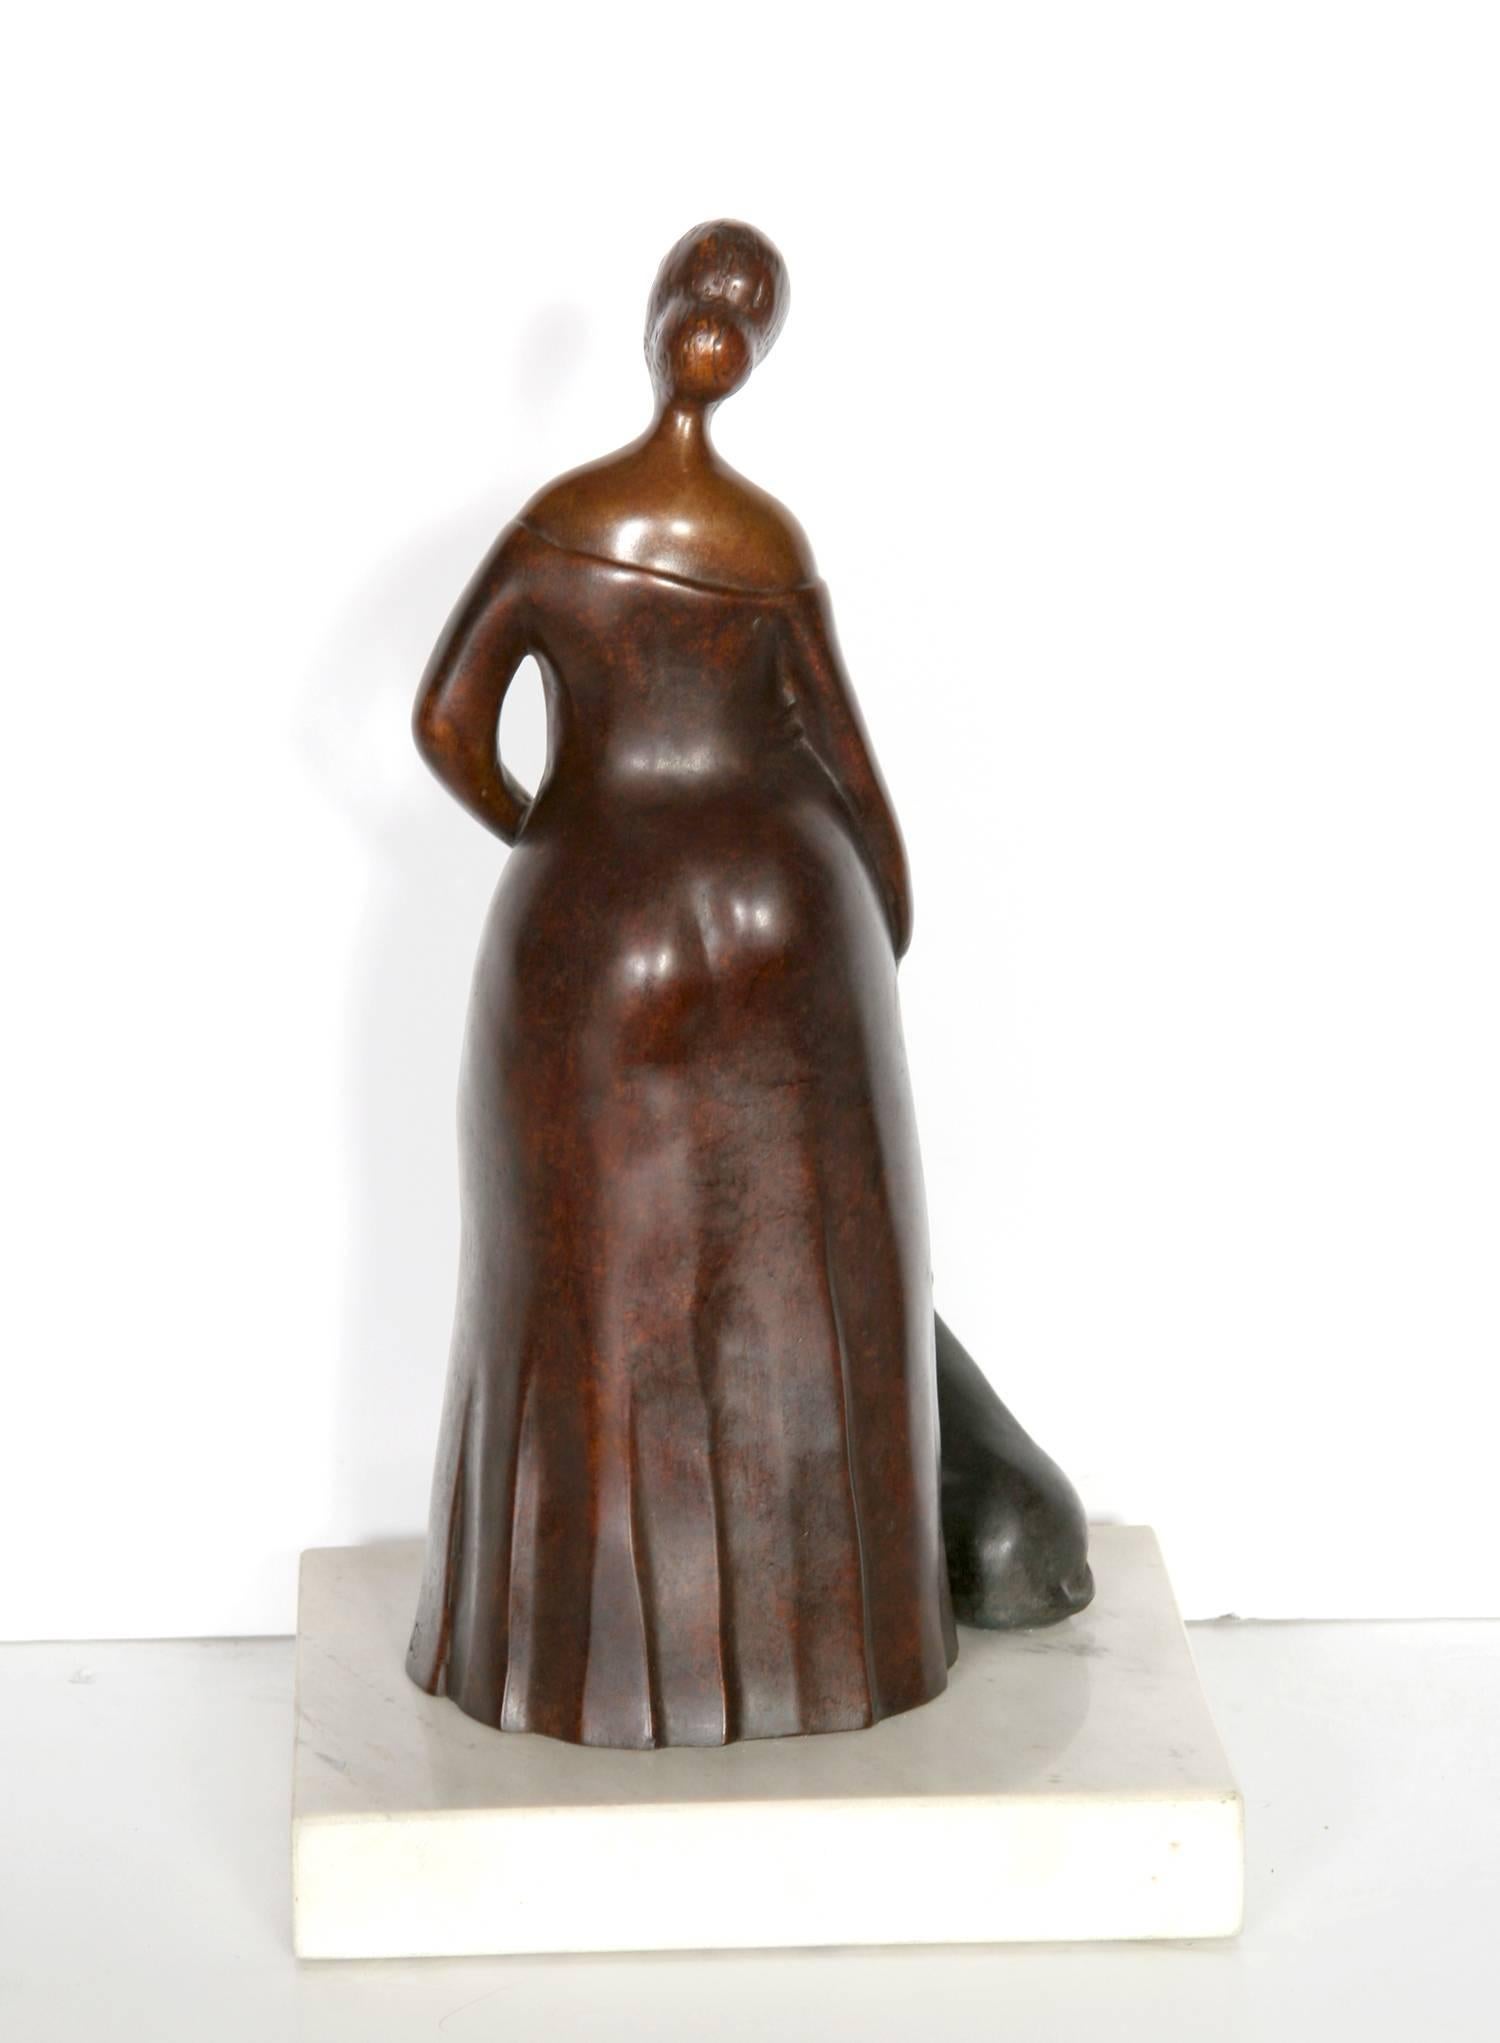 Artist: Branko Bahunek, Croatian (1935 - )
Title: Woman with Dog
Year: circa 1990
Medium: Bronze Sculpture, Signature 'BB' inscribed
Size: 12  x 6  x 5 in. (30.48  x 15.24  x 12.7 cm)
Base 1.5 inches tall